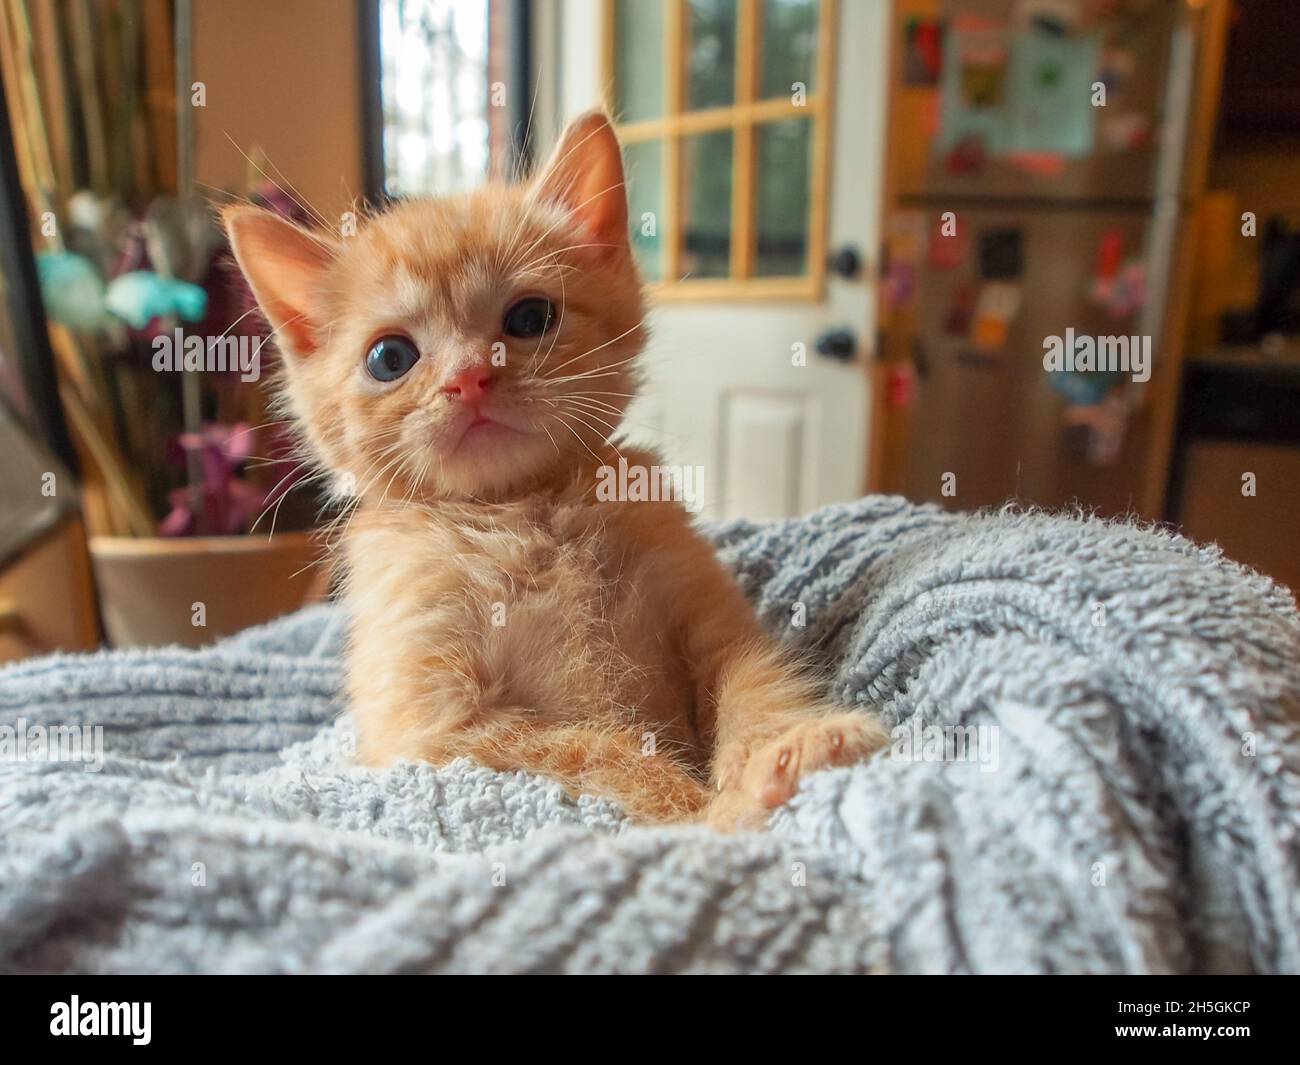 Ginger kitten sitting up like a person while wrapped in a blue towel Stock Photo